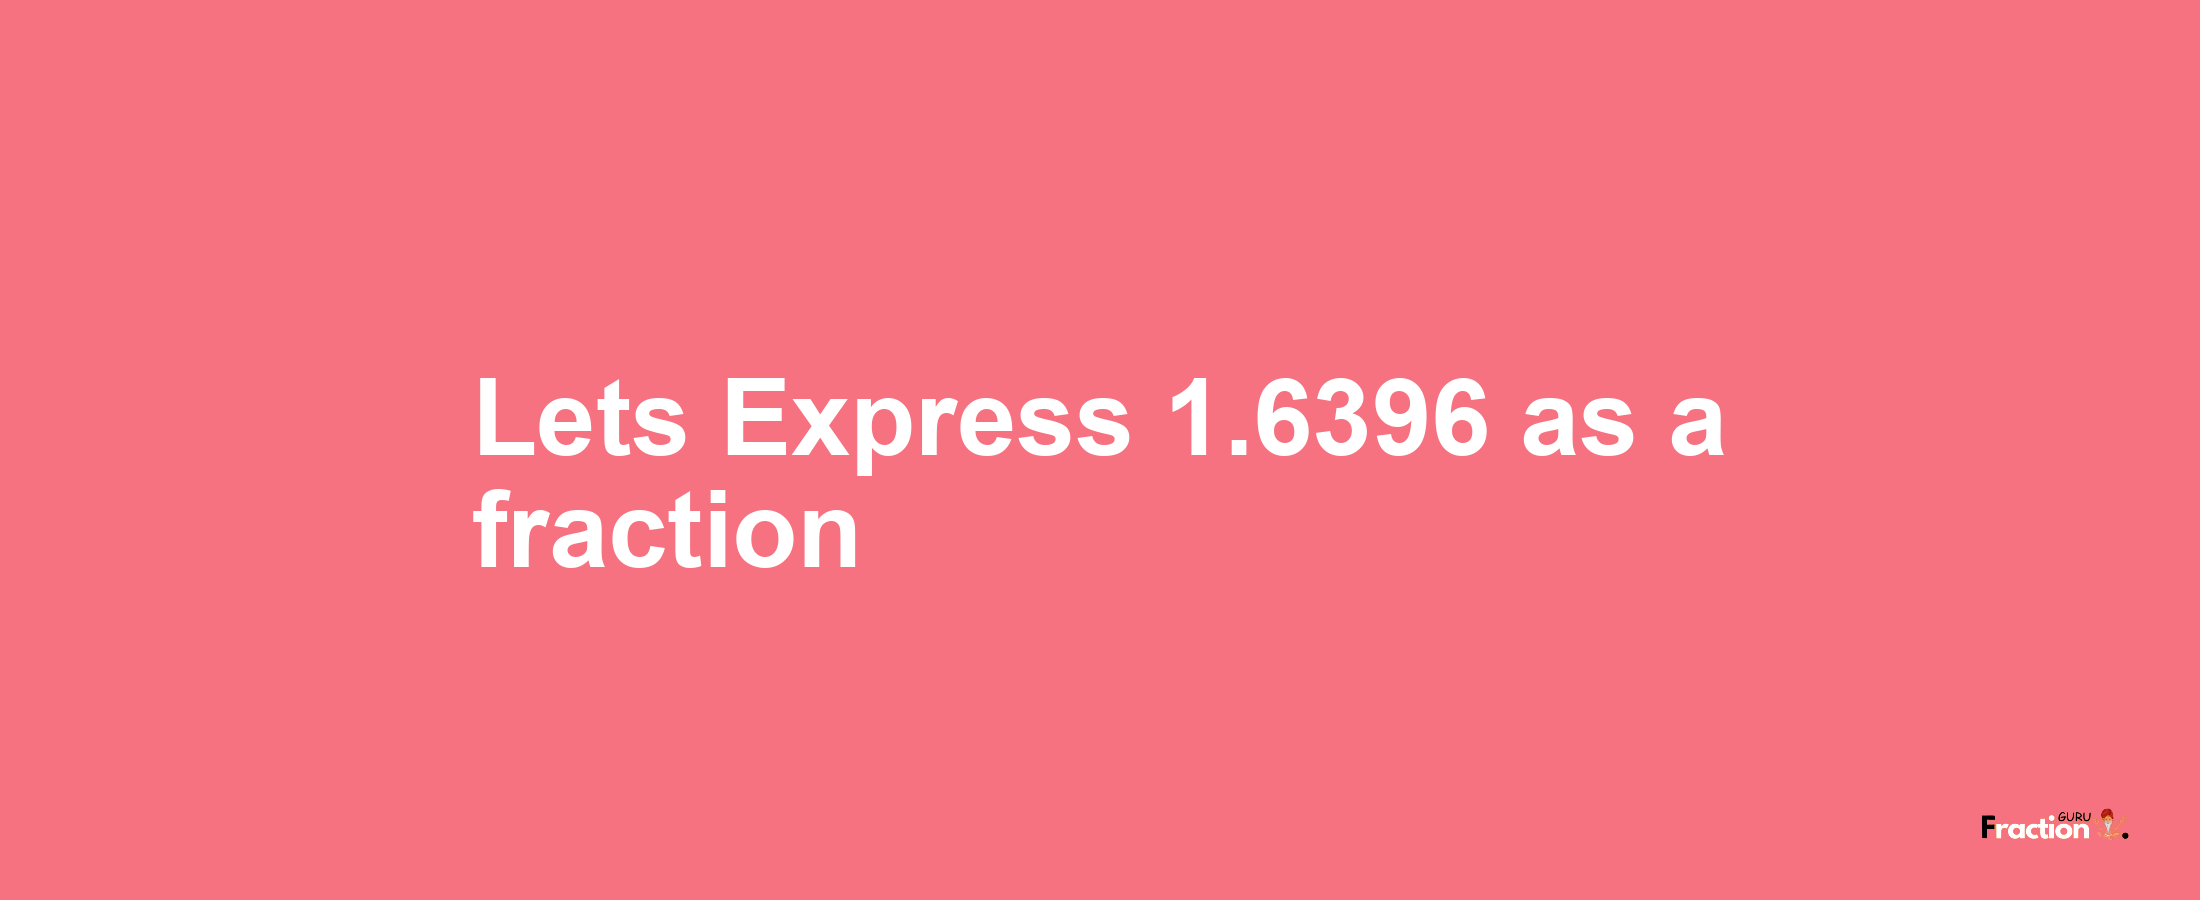 Lets Express 1.6396 as afraction